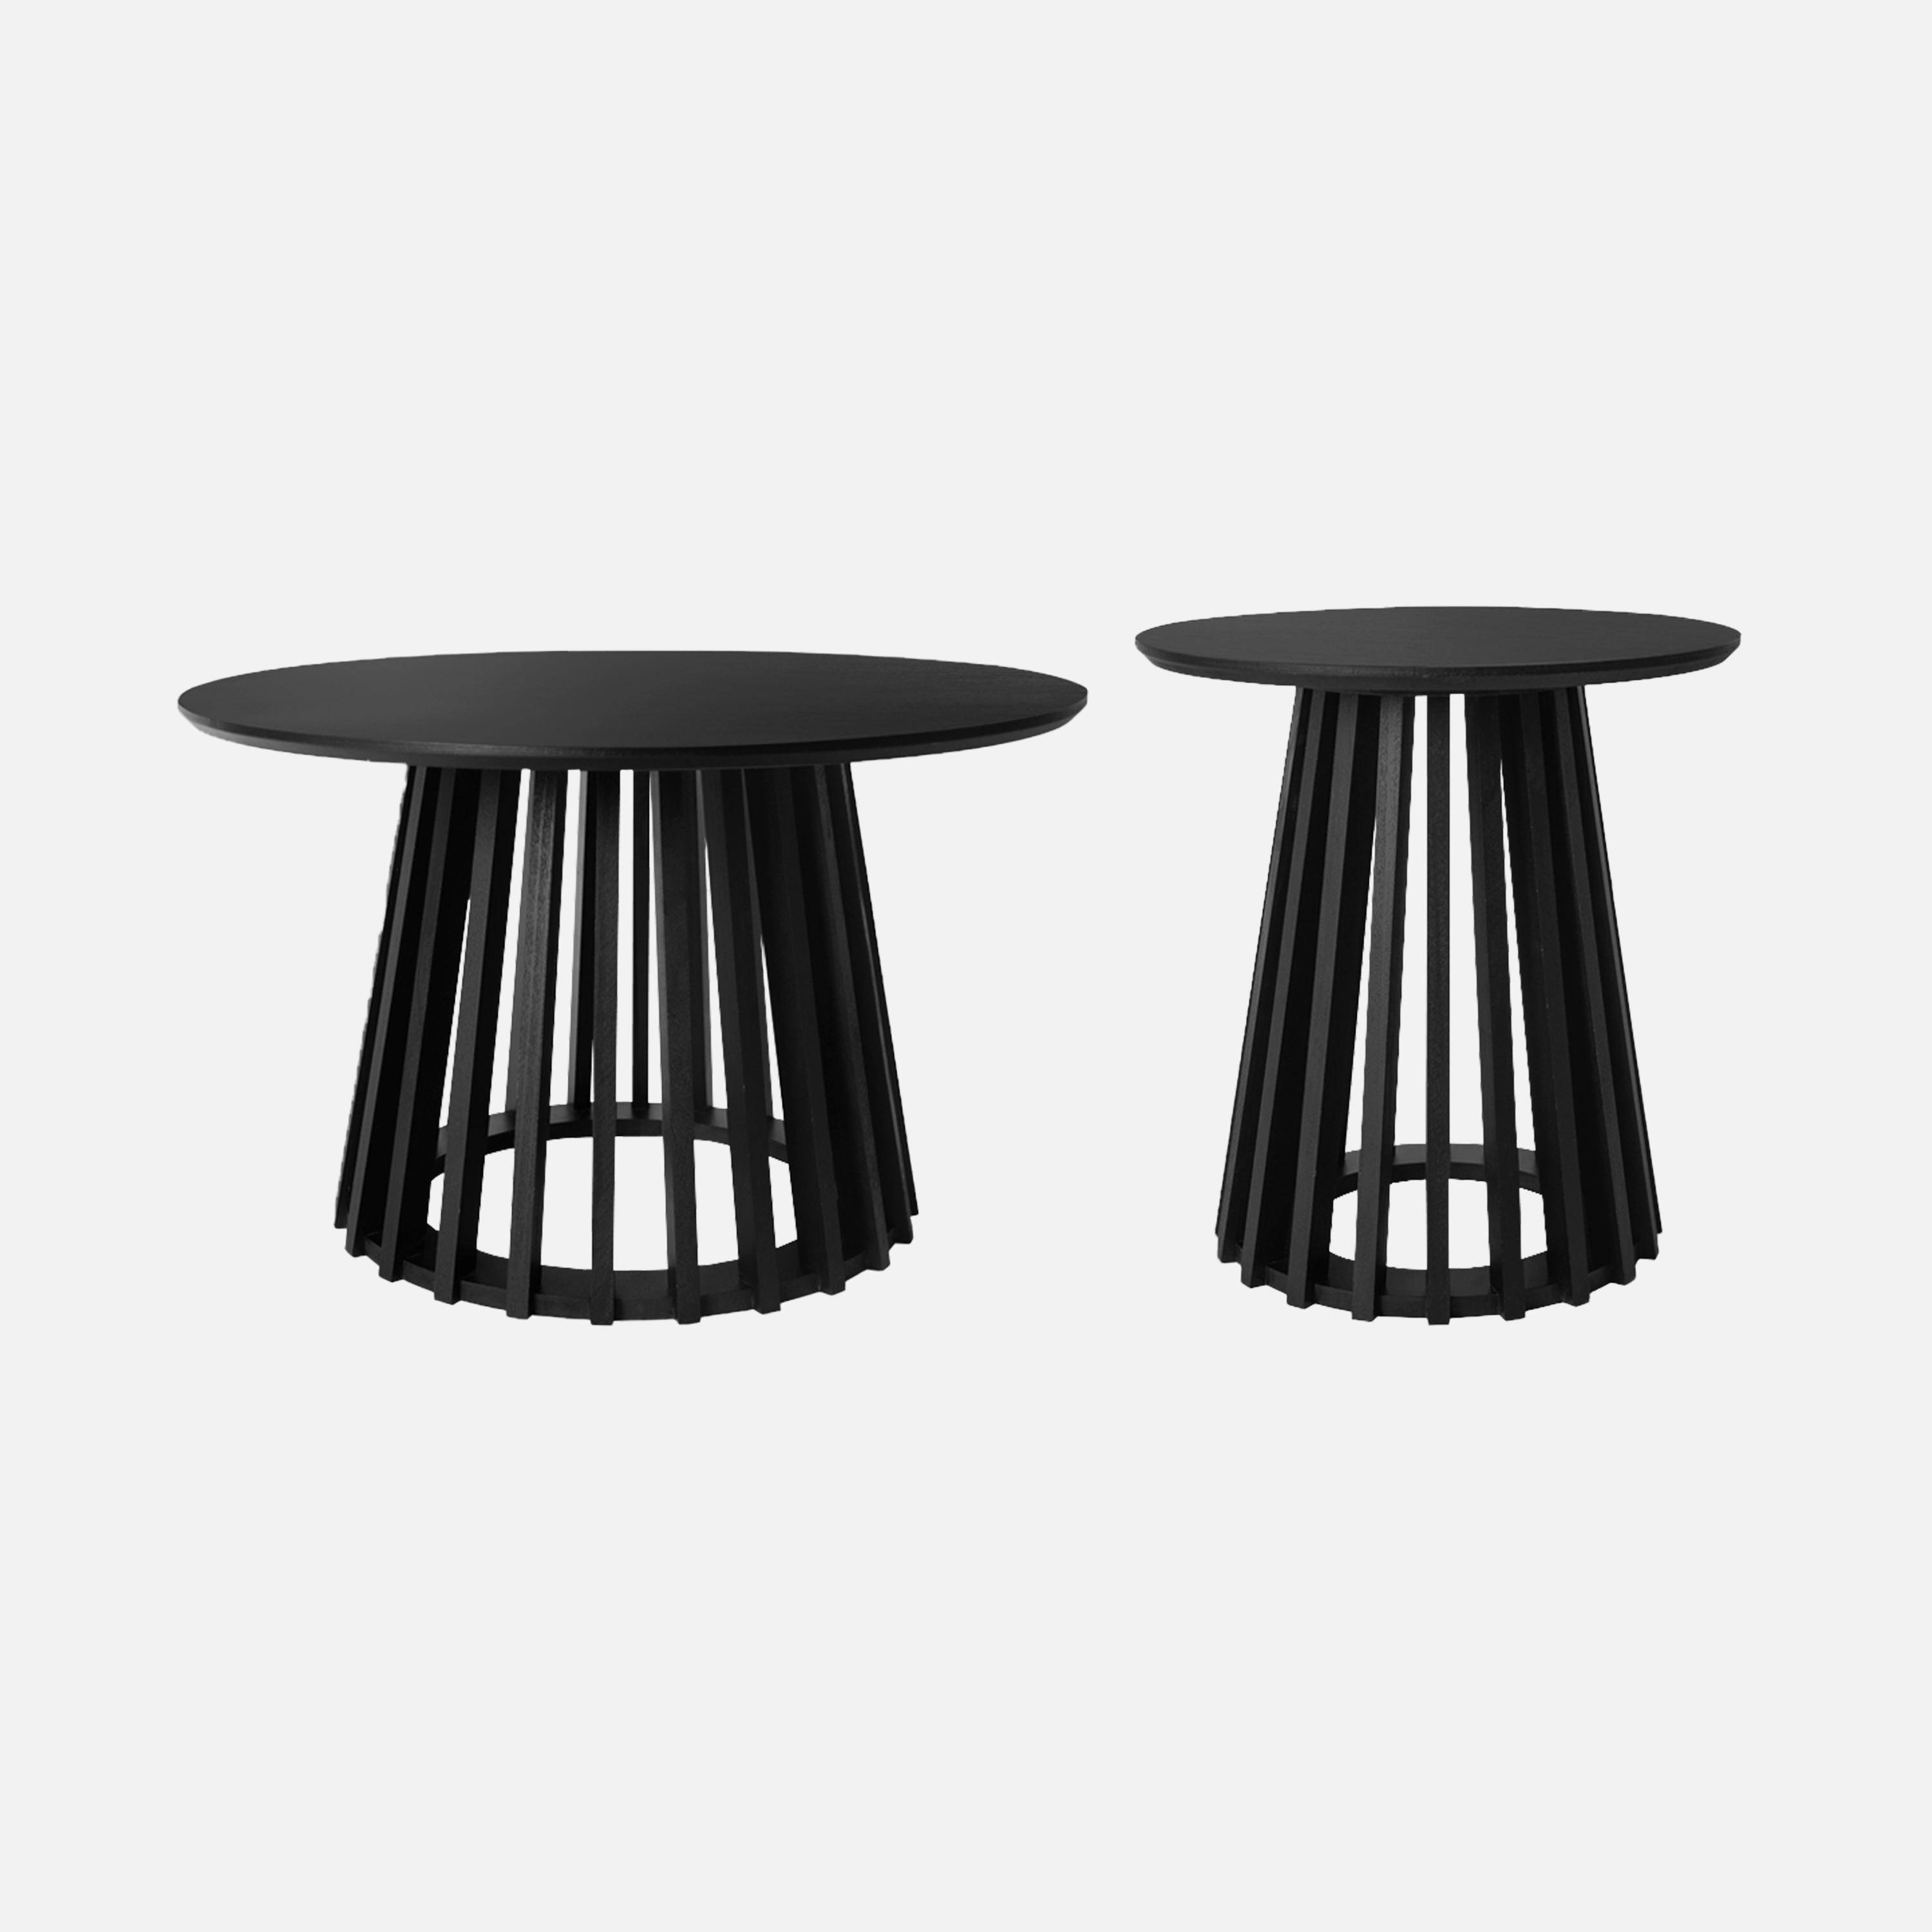 Set of 2 round coffee tables with black wood-effect tops and fir-wood legs, 40cm and 60cm,sweeek,Photo1